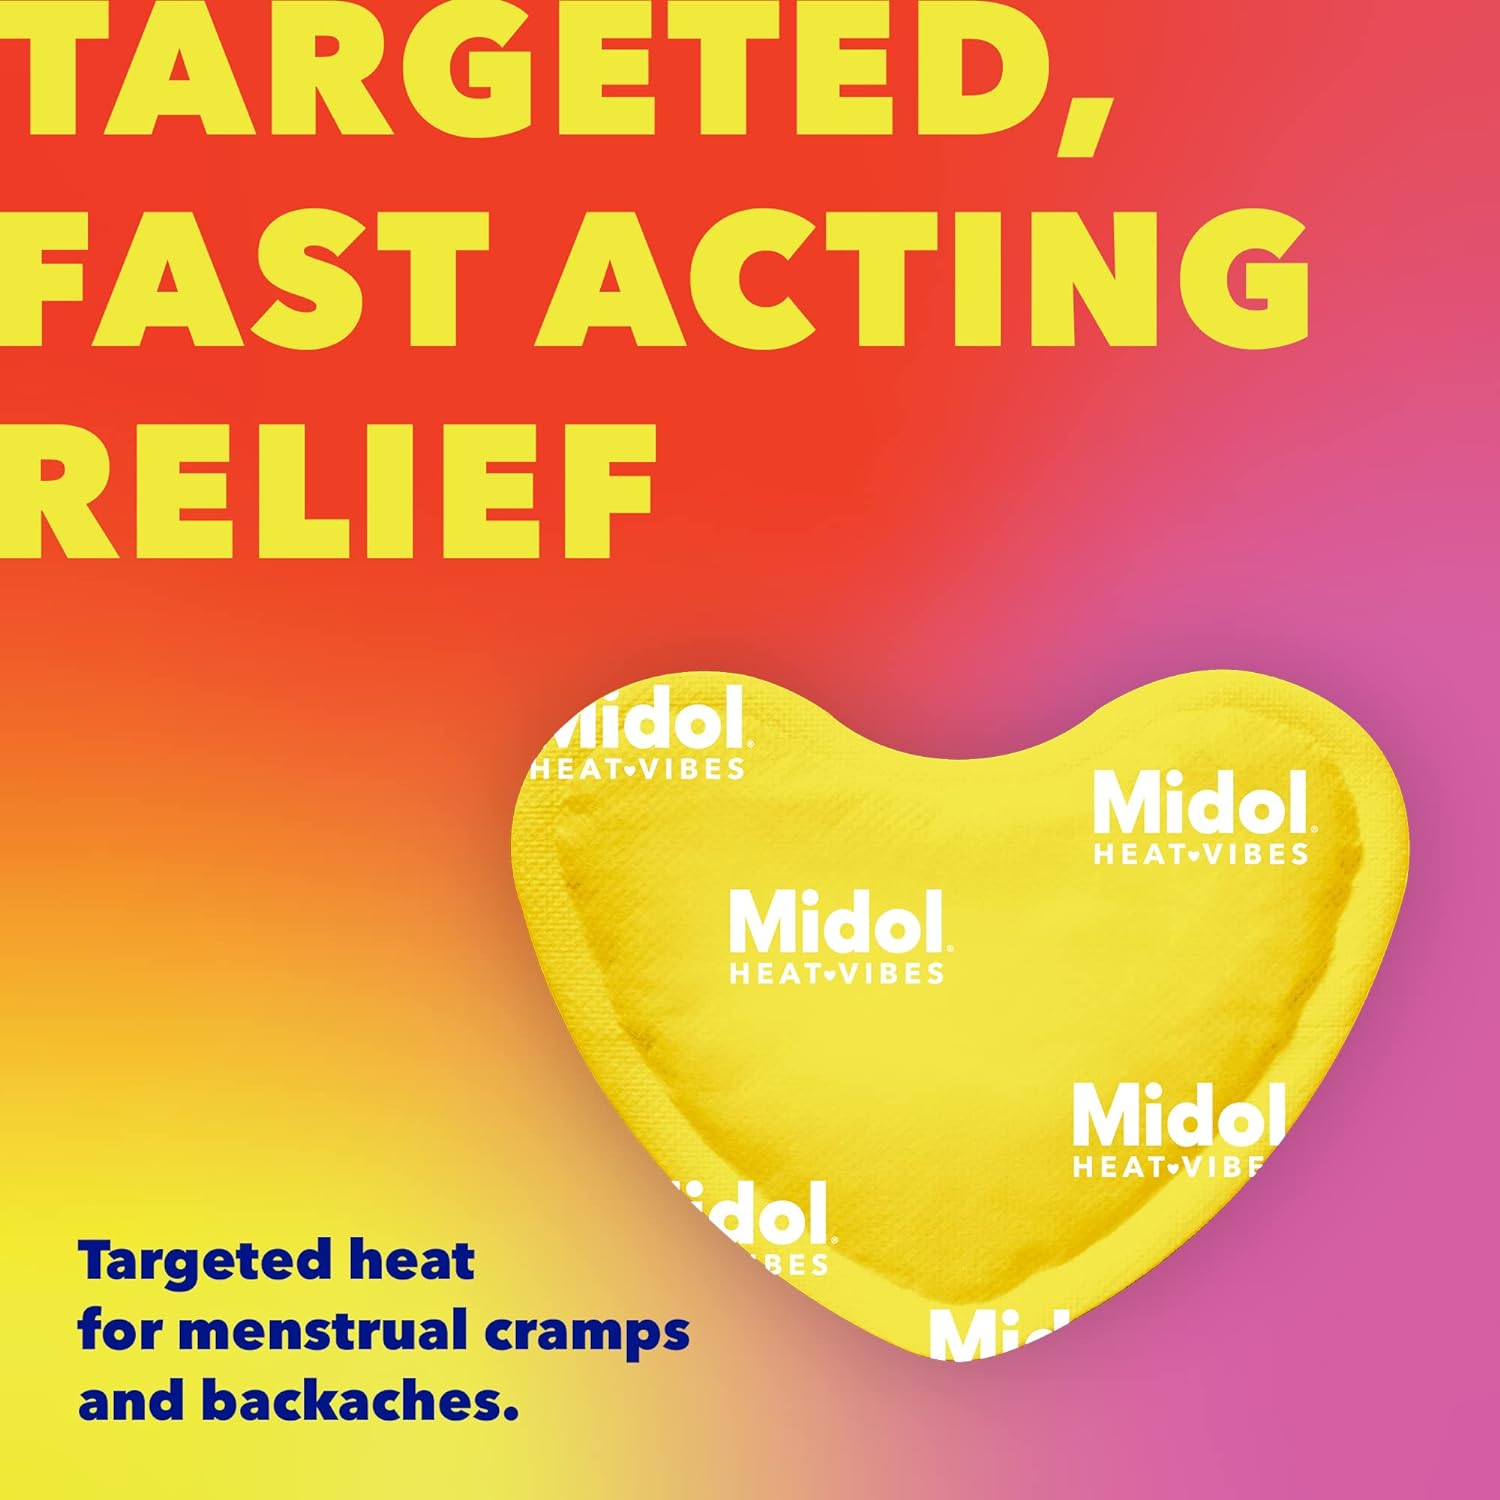 Midol Heat Vibes Menstrual Patches 3 ct: Midol Heat Vibes Menstrual Pain Relief Heat Patches for Period Cramp and Backache Relief - Pack of 3 : Health & Household